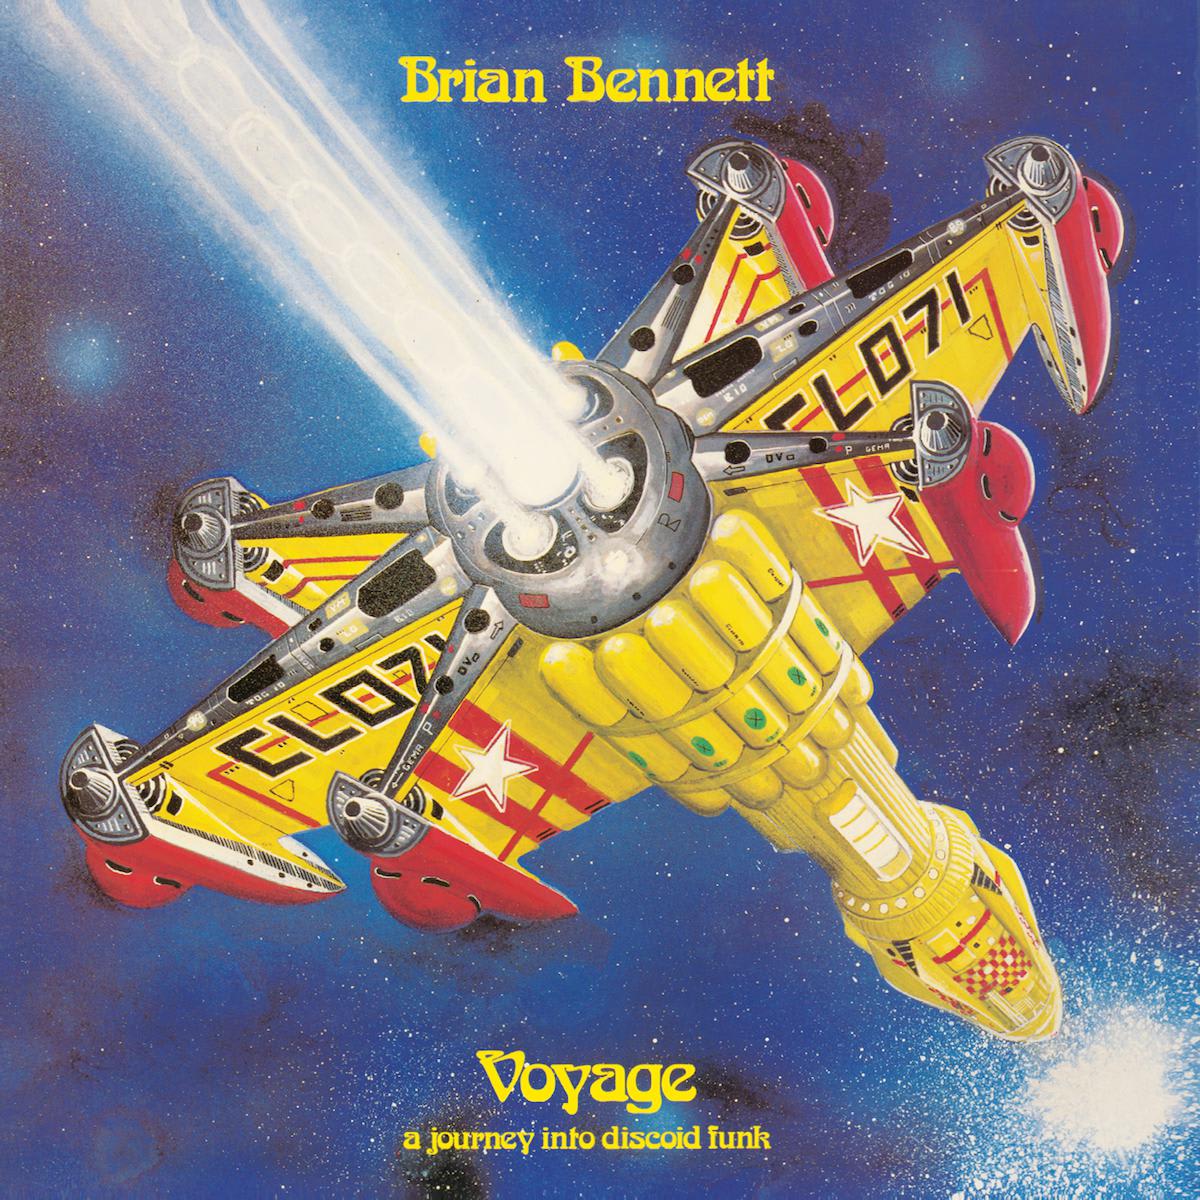 Album Cover for "Voyage (A Journey Into Discoid Funk)" by Brian Bennett, 1978